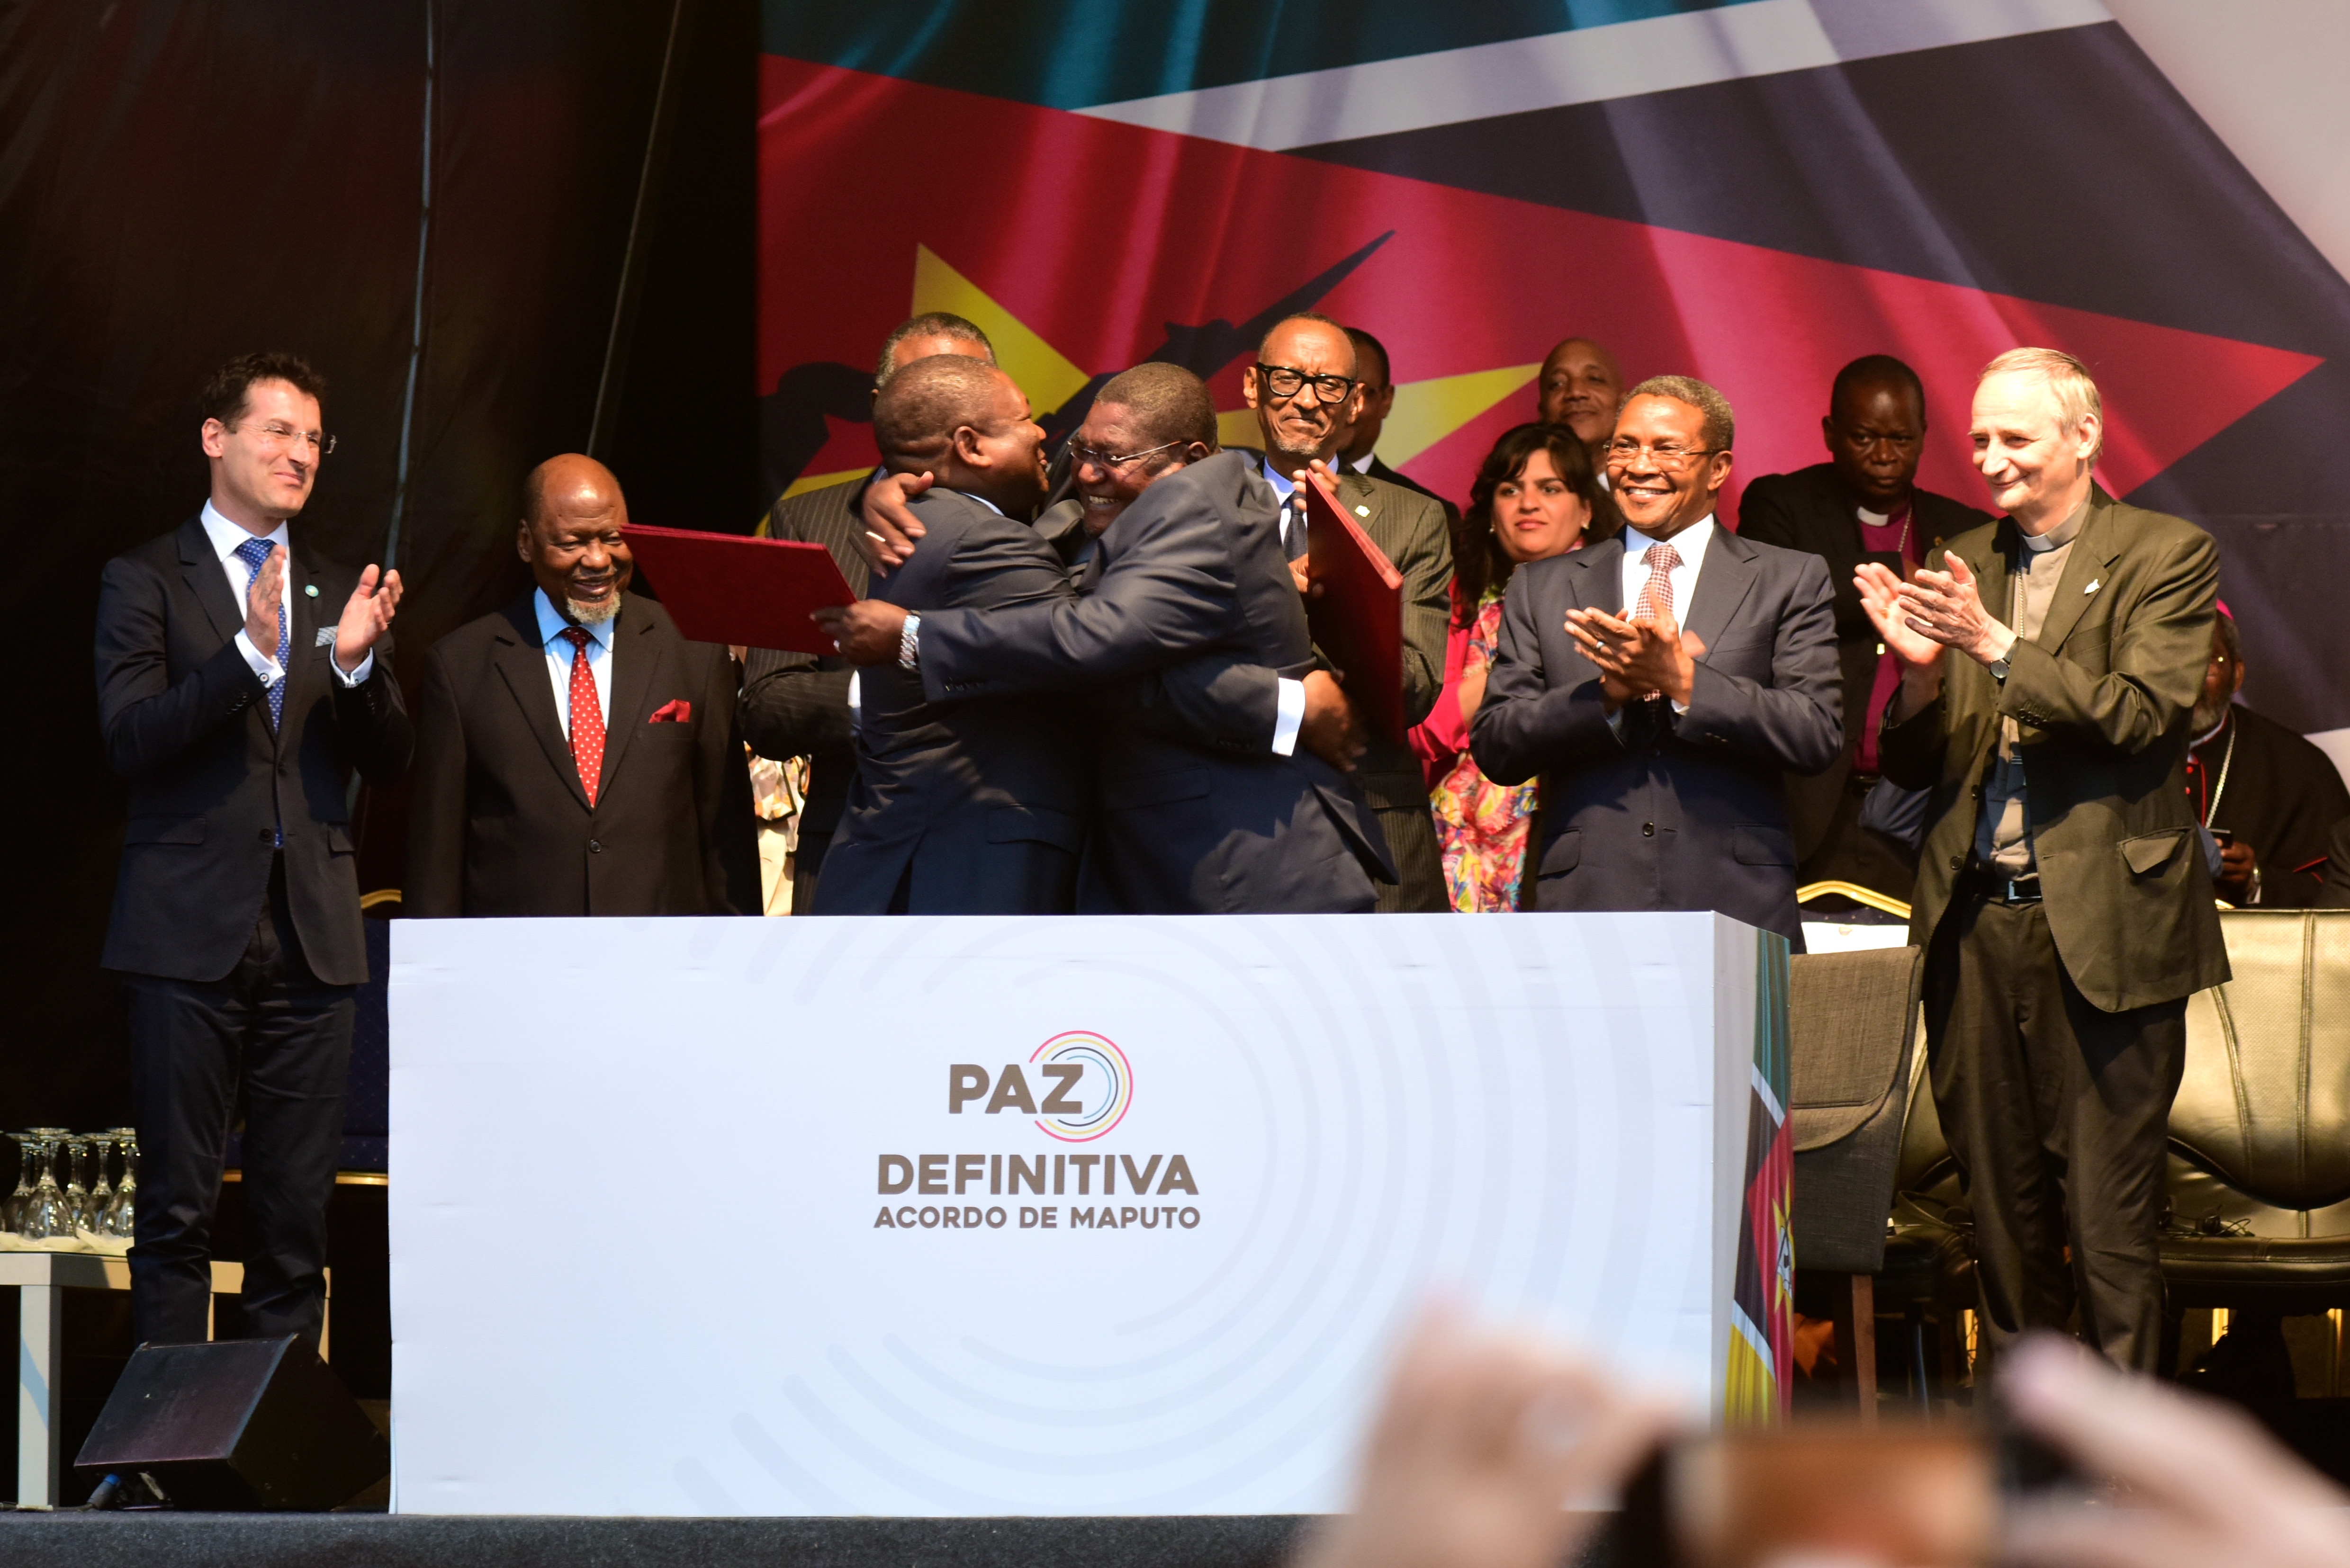 Mozambique's President Nyusi and the leader of the former rebel group Renamo (Ossufo Momade) embrace at the ceremony to mark the signing of the peace accord following decades of violence.